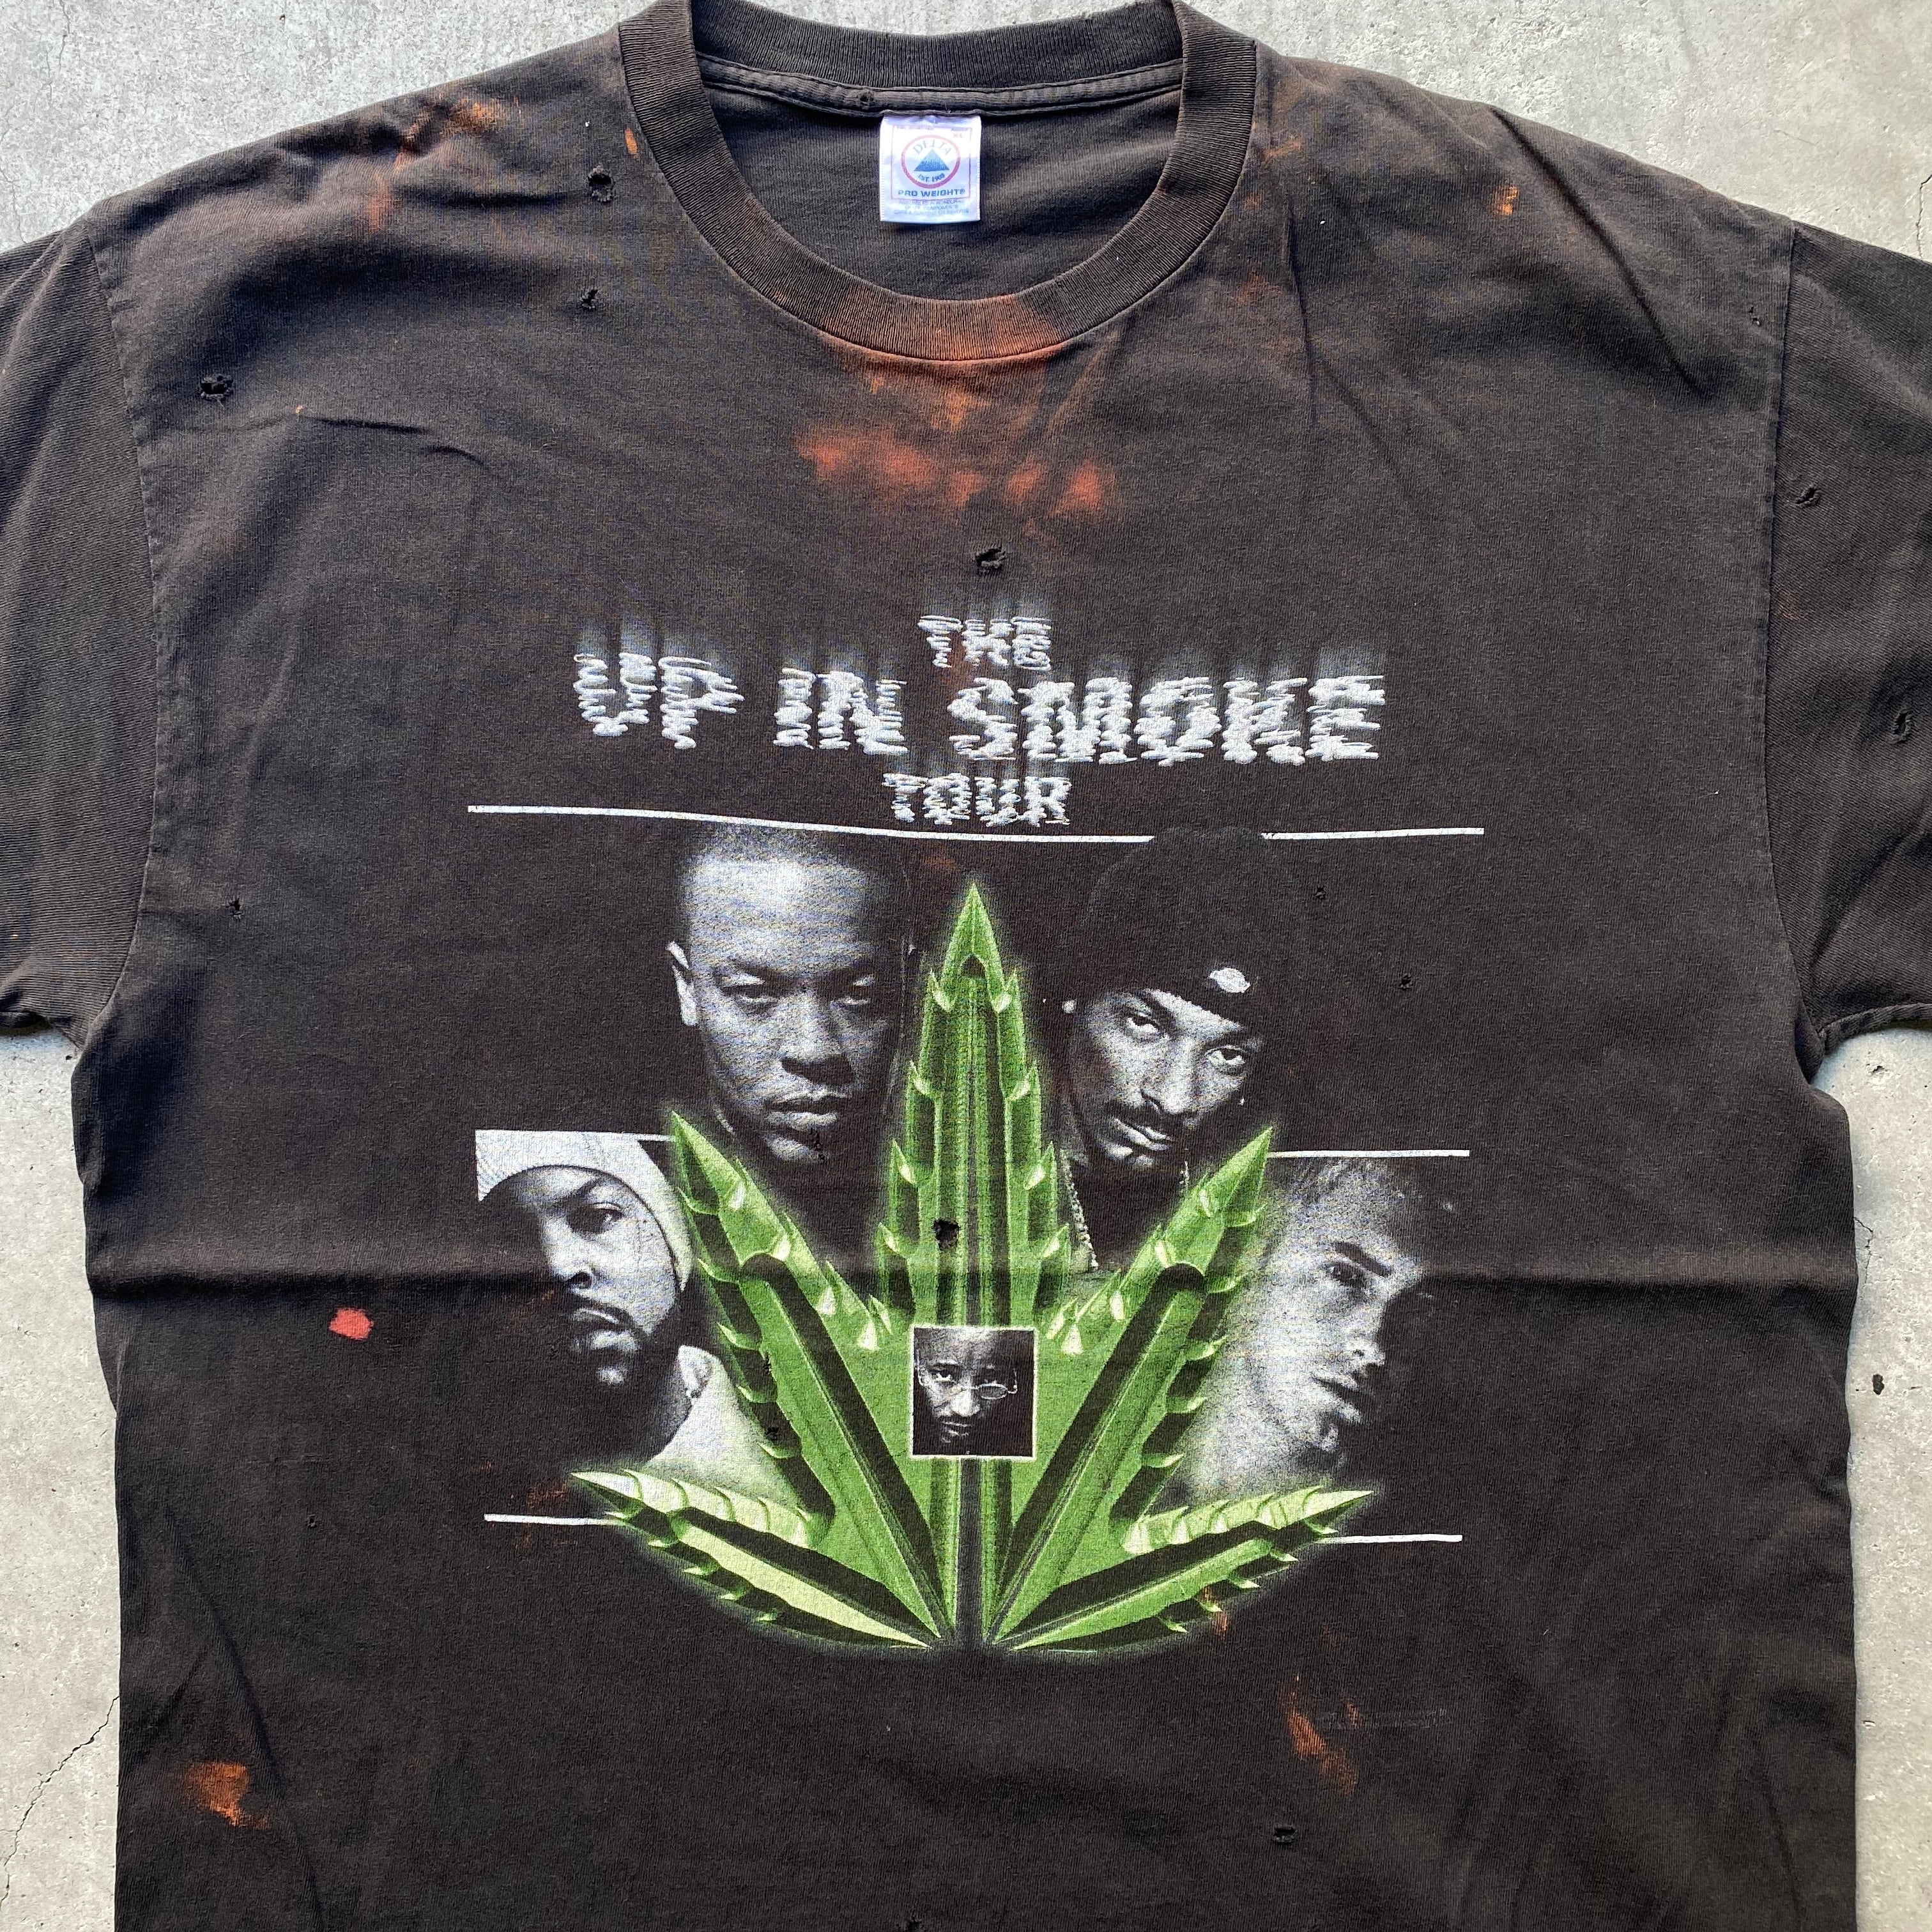 VINTAGE ヴィンテージ 00S THE UP IN SMOKE TOUR T-shirt ヴィンテージ ザ アップ イン スモーク ツアー 両面プリント 半袖Tシャツ ホワイト